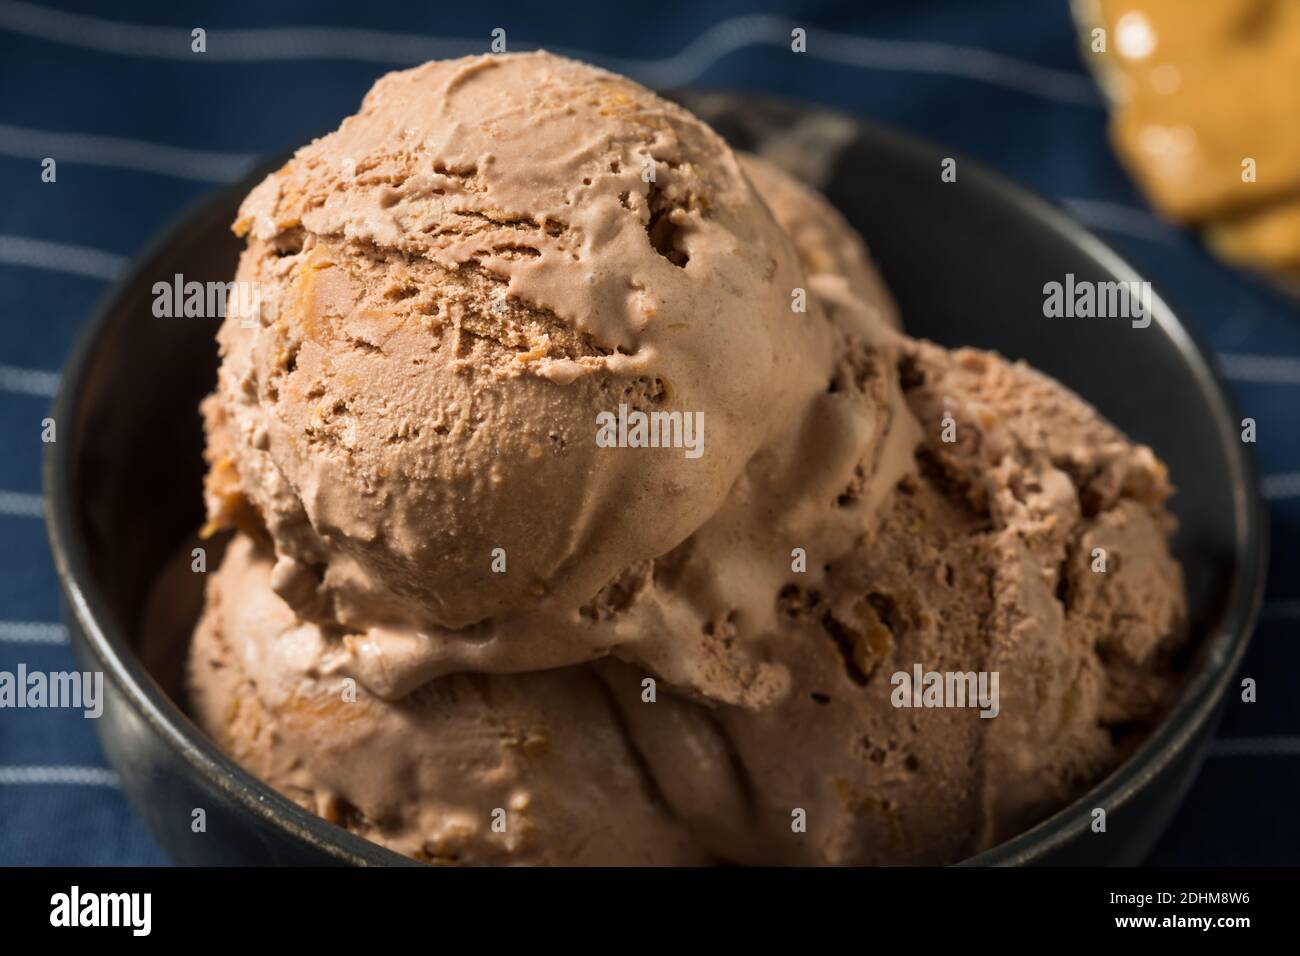 Homemade Chocolate Peanut Butter Ice Cream in a Bowl Stock Photo